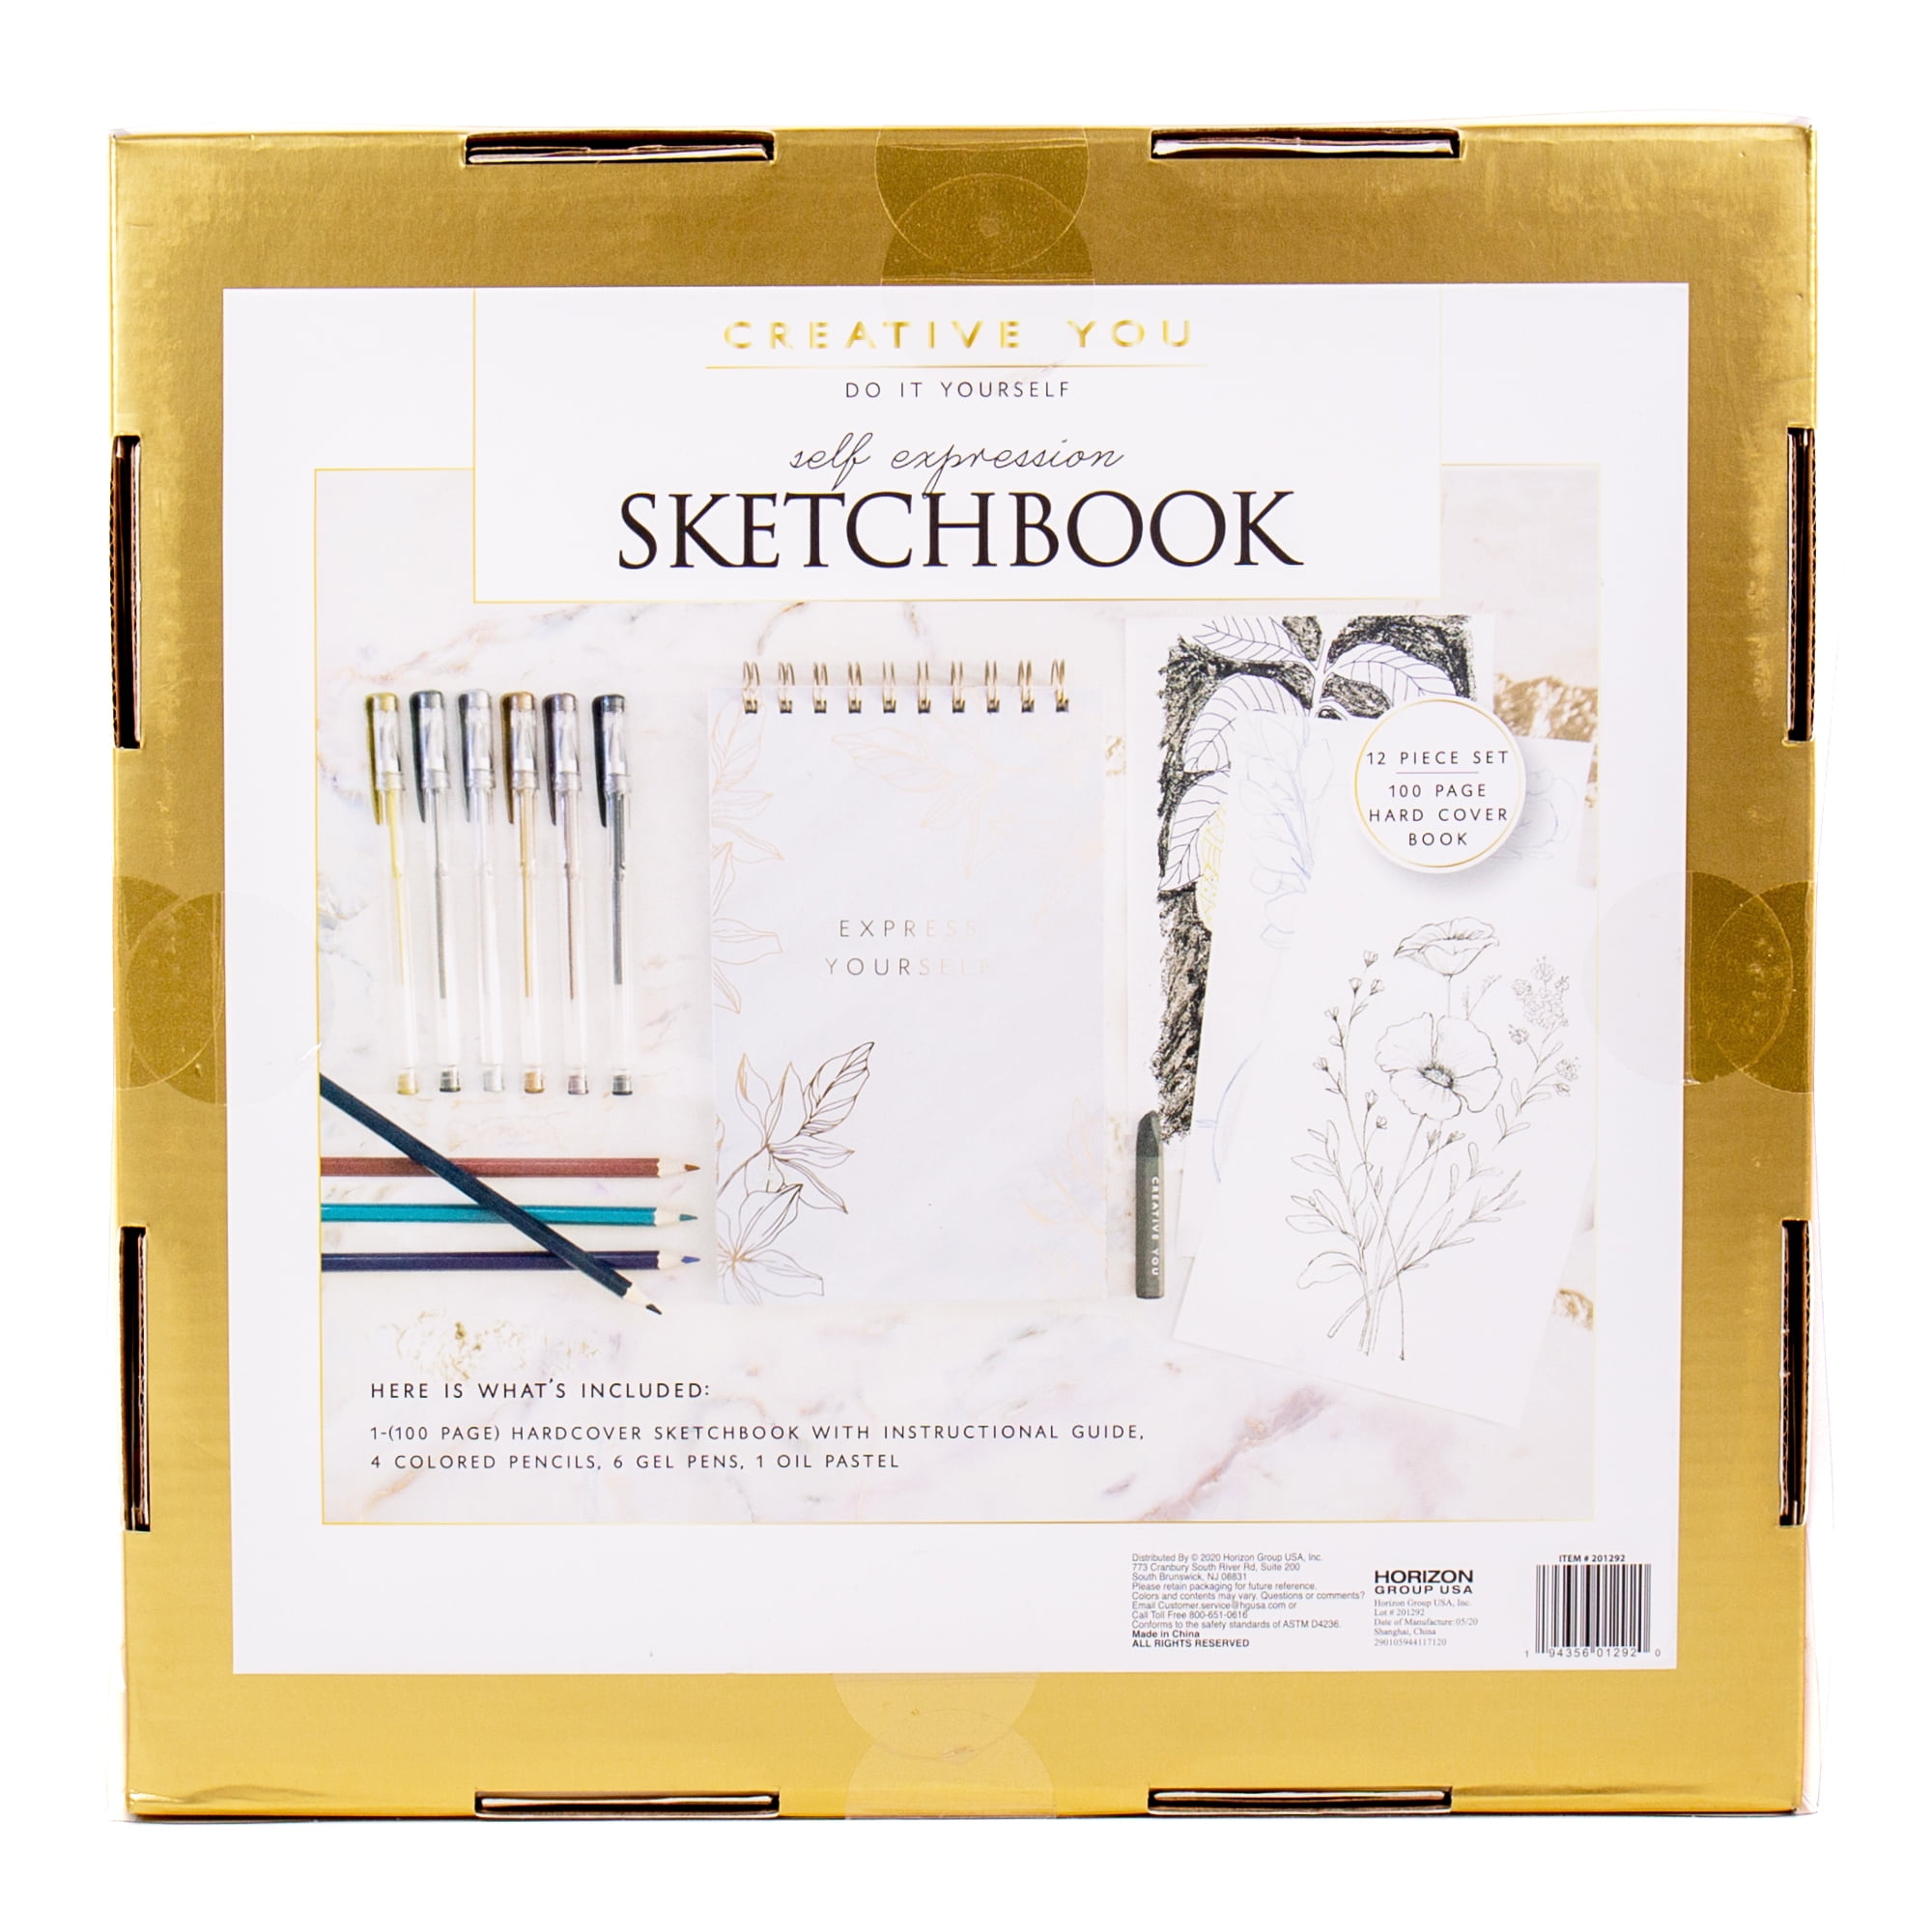 Express Yourself with A Wholesale fashion sketchbook from 